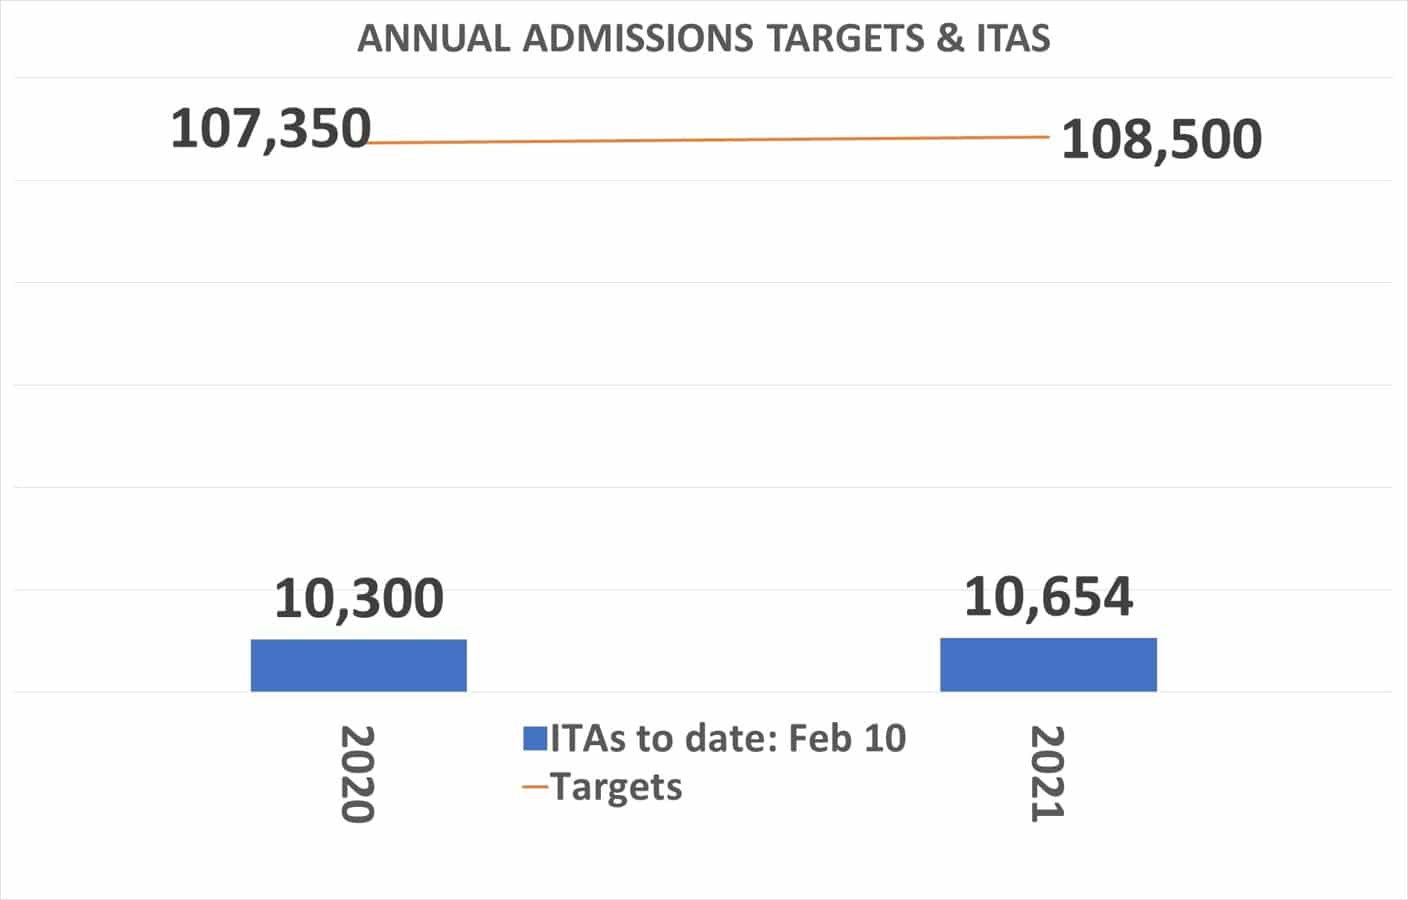 Annual-Admission-Targets-and-ITAs-for-2020-and-2021